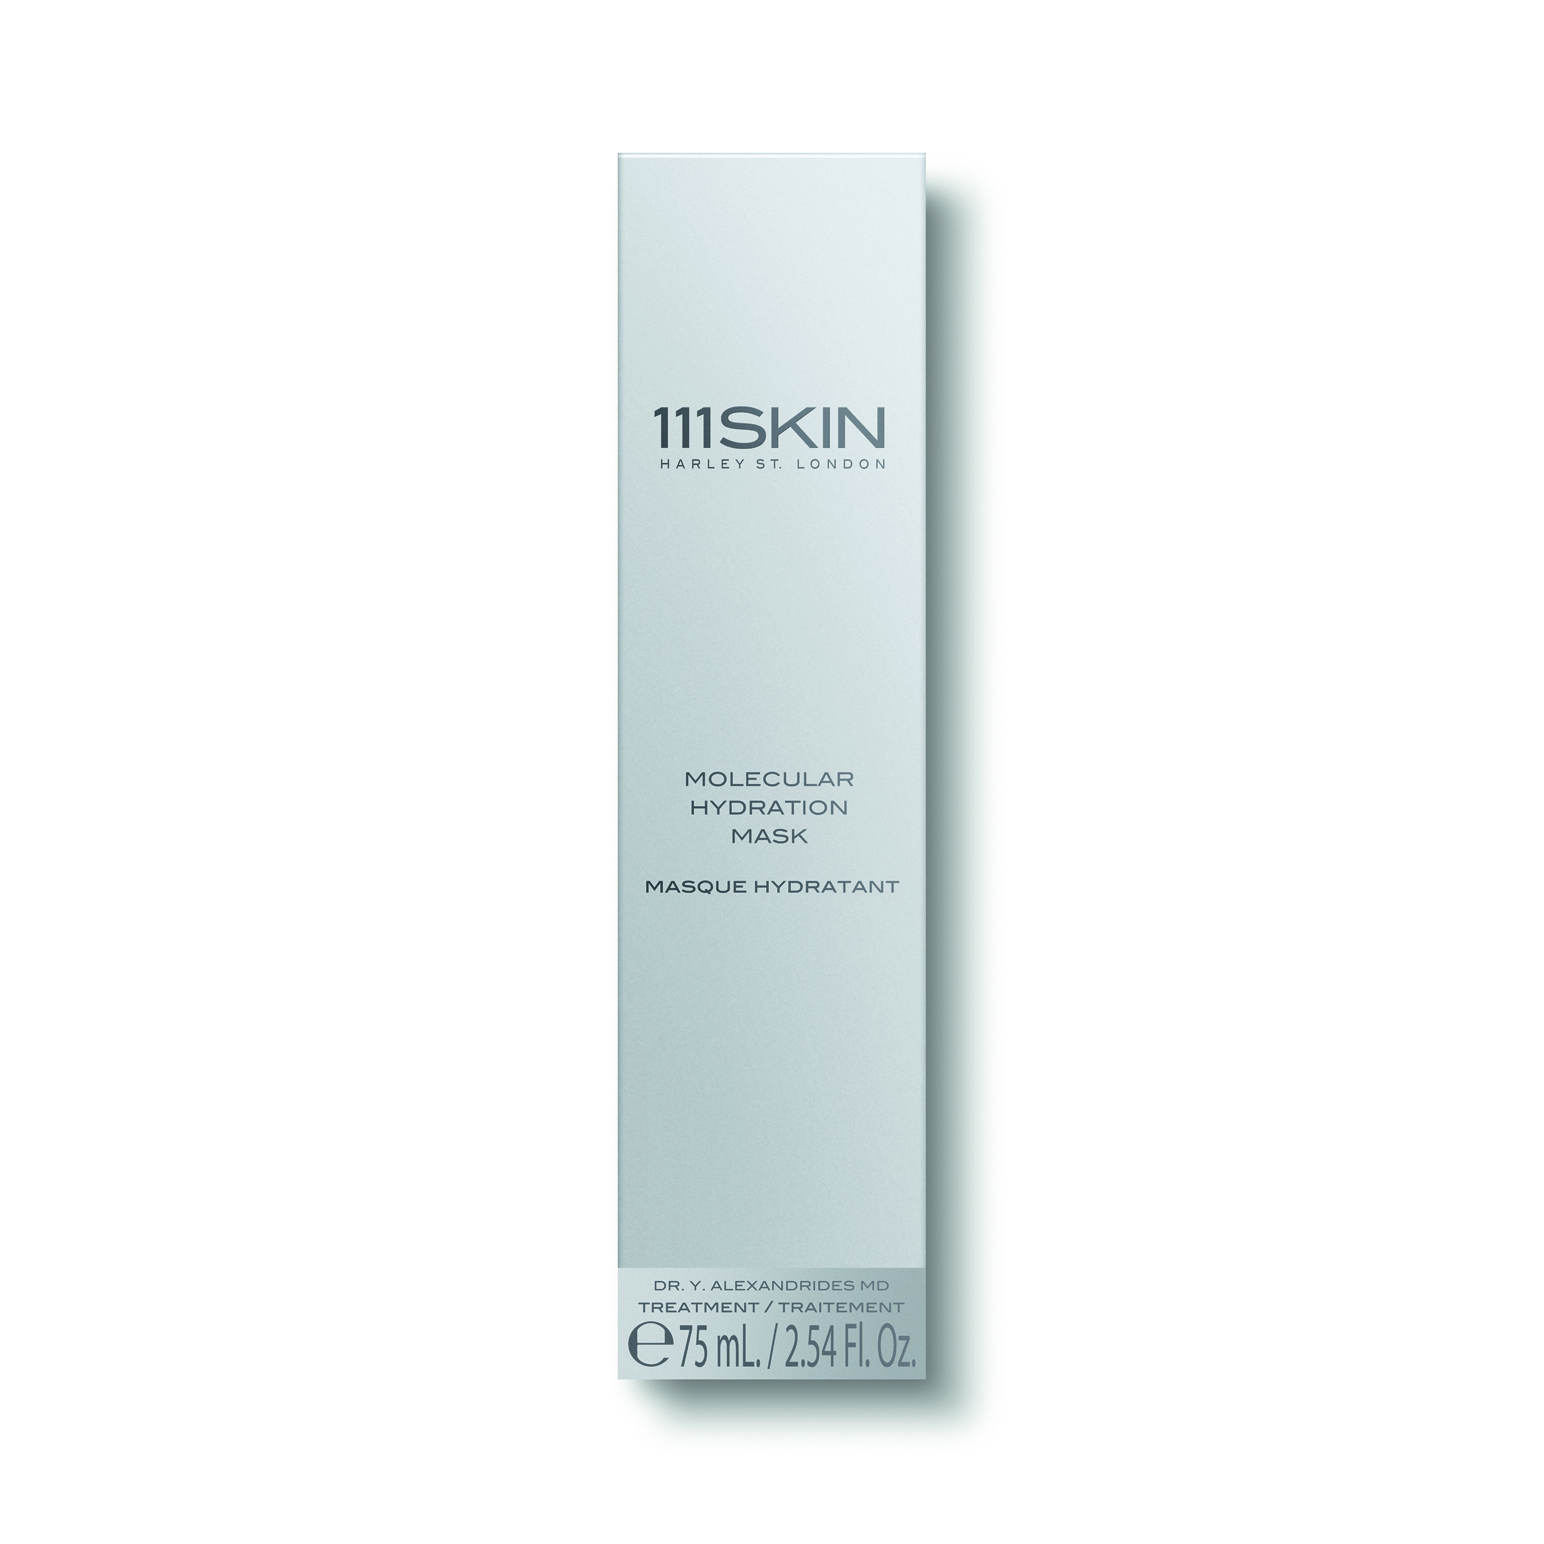 111SKIN Masque d'hydratation moléculaire | Space NK